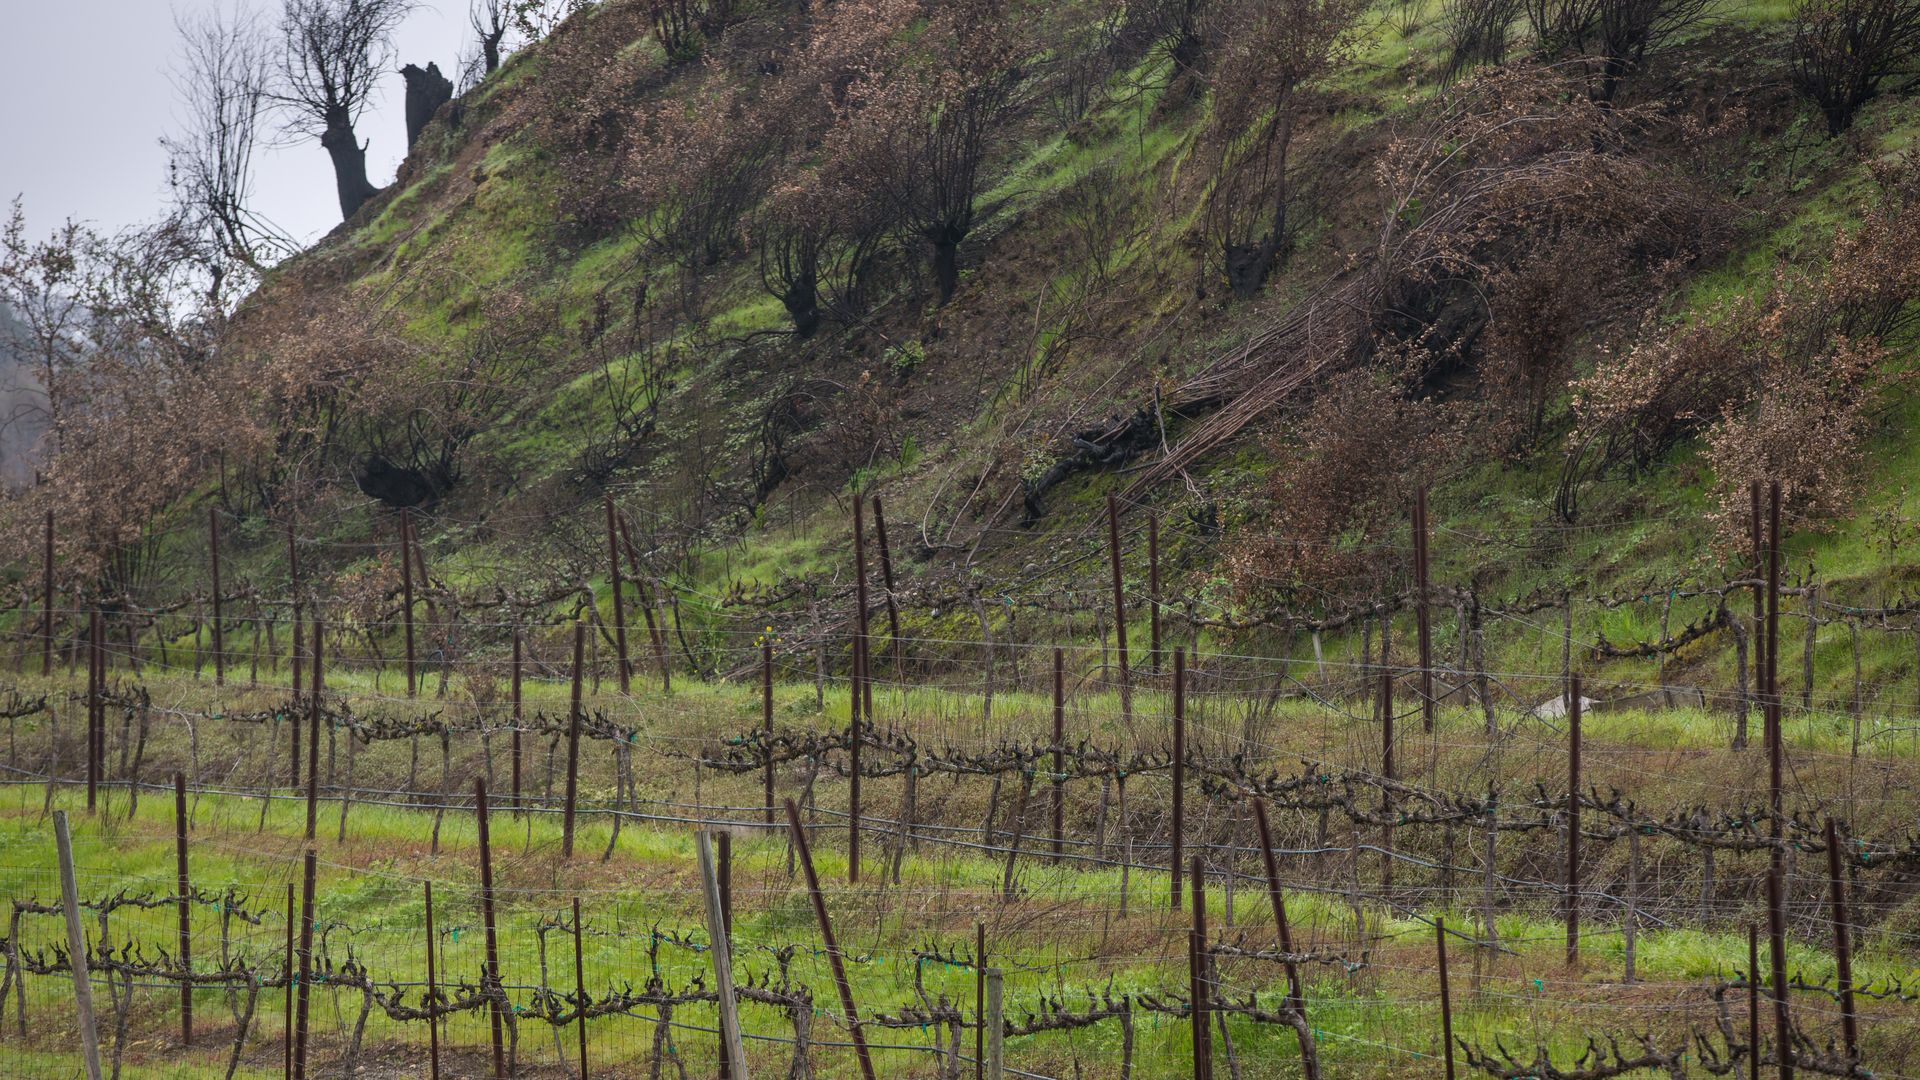 Grapevines along Old Redwood Highway burned in the October 9 Tubbs Fire